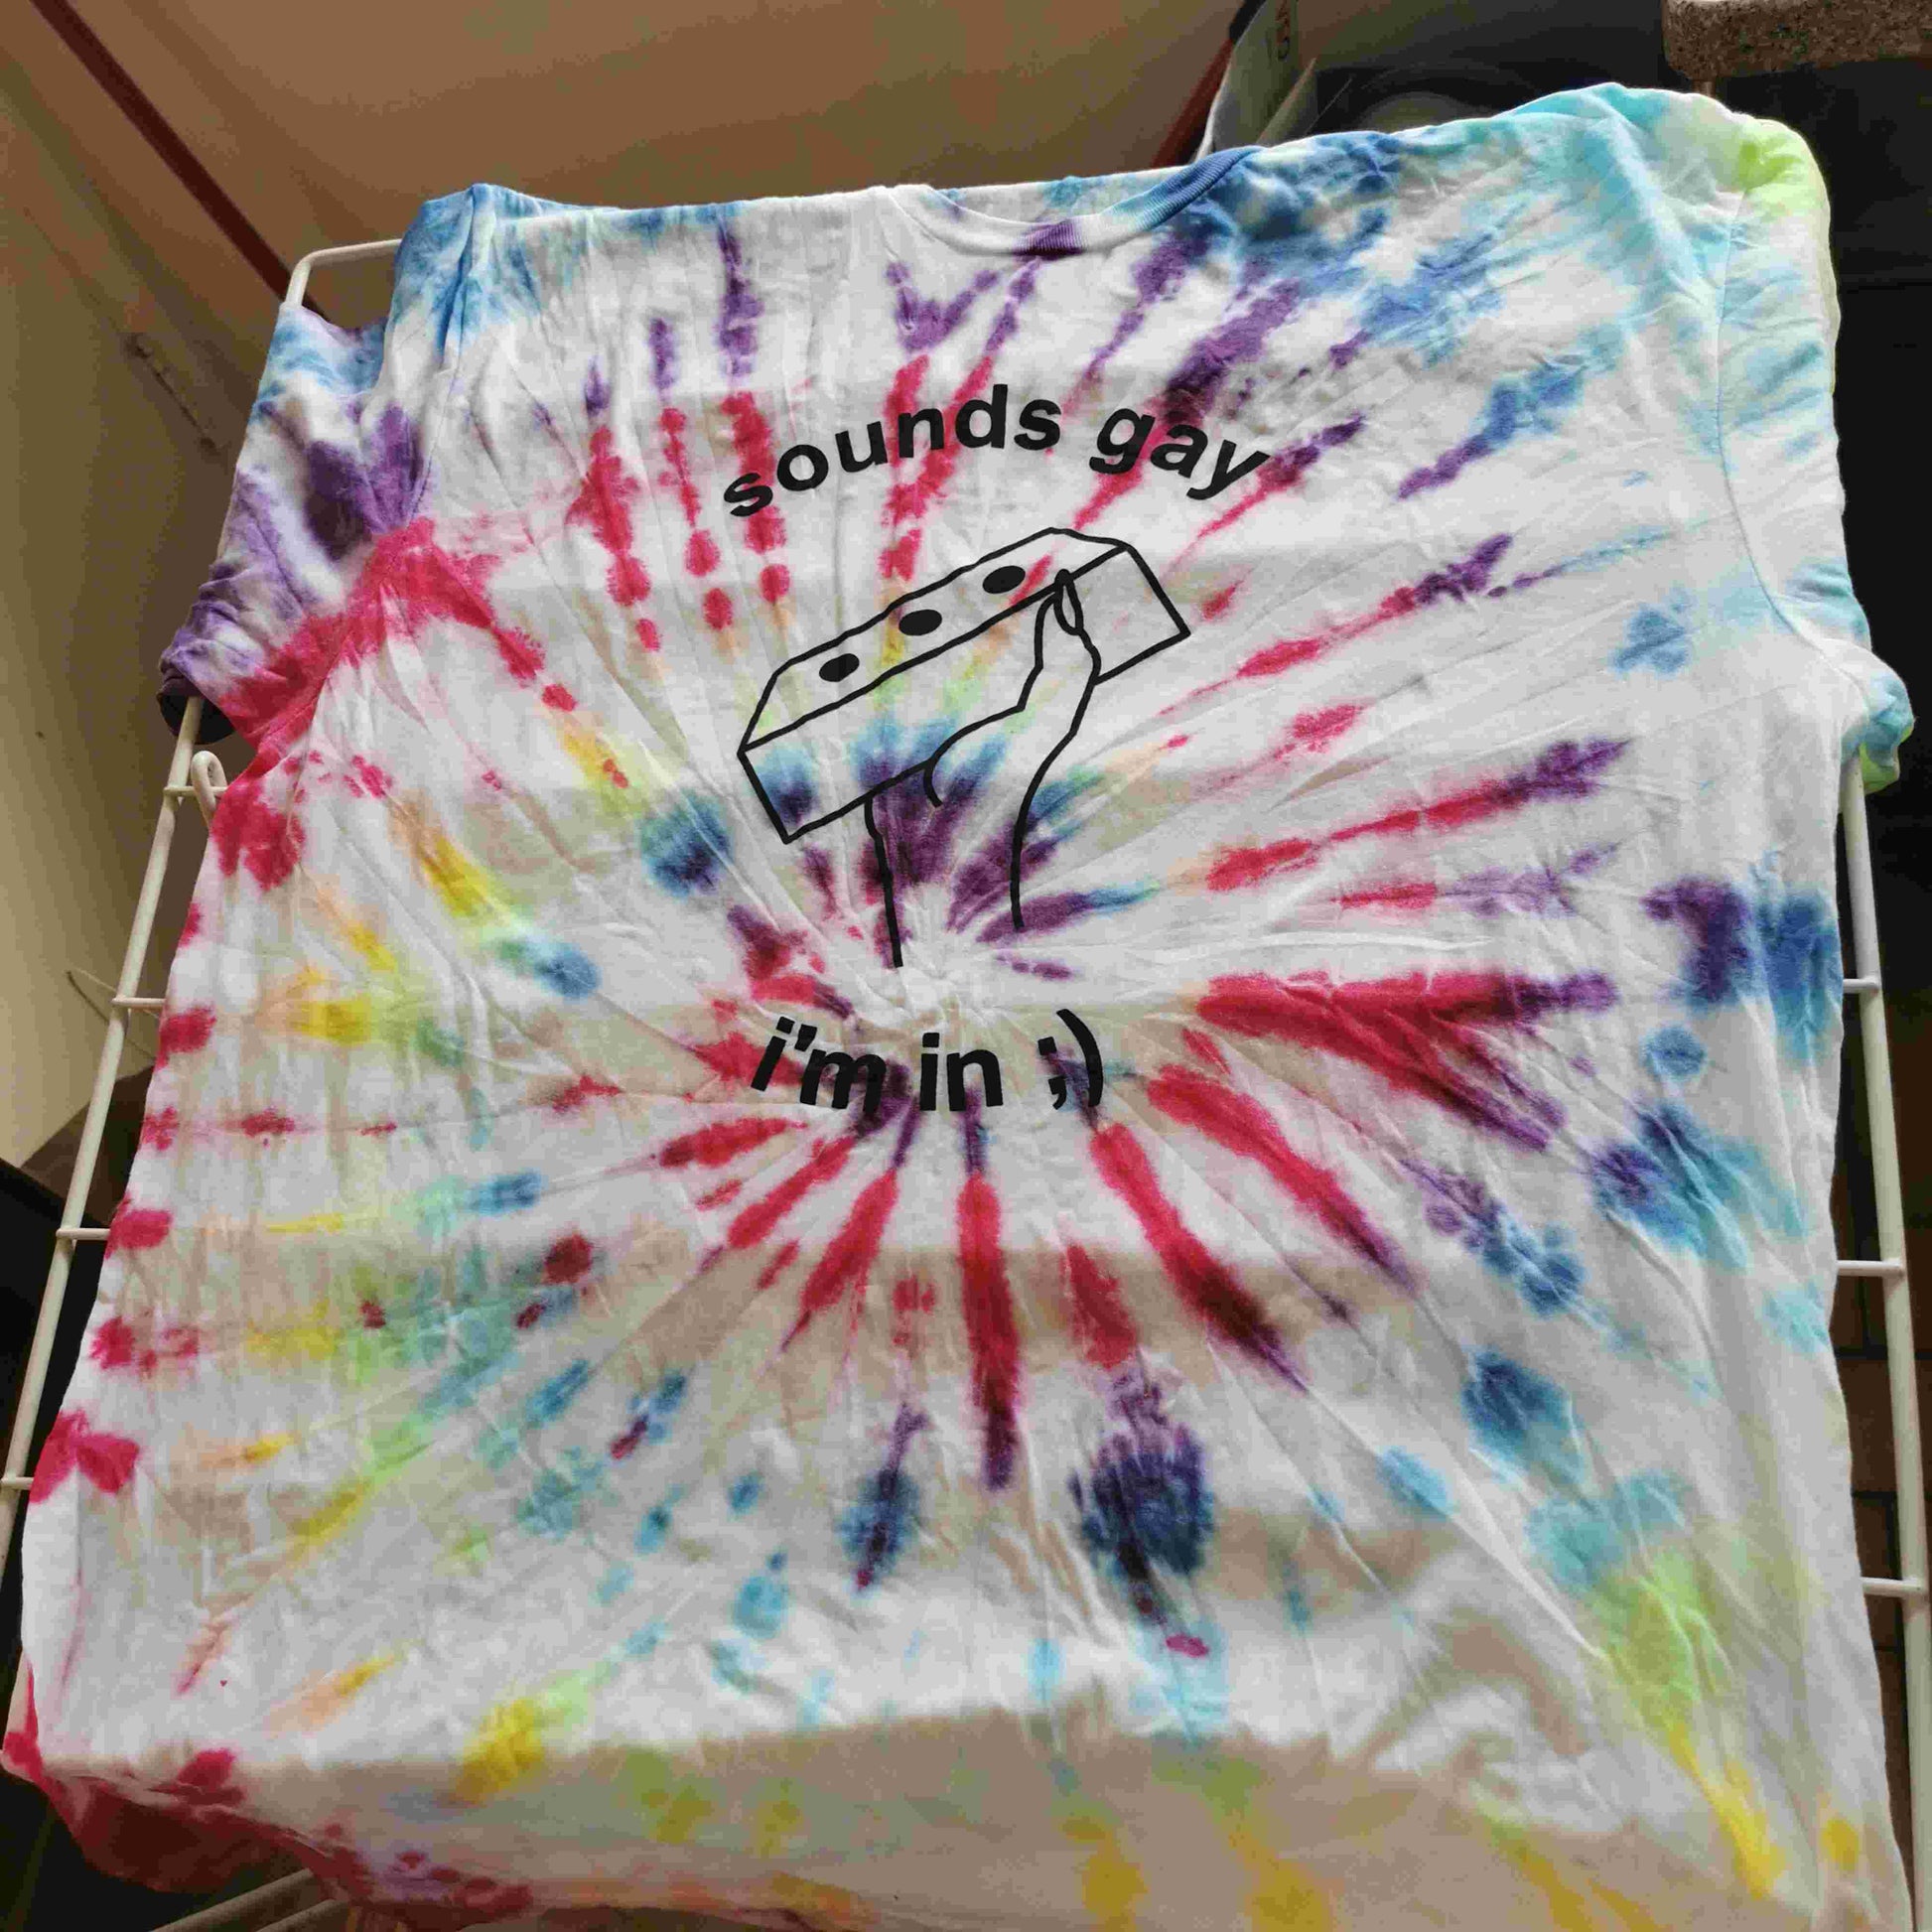 rainbow swirl tie-dye t-shirts with text reading "sounds gay i'm in" and a line drawing of a hand holding a brick. Shirt is drying on a drying rack